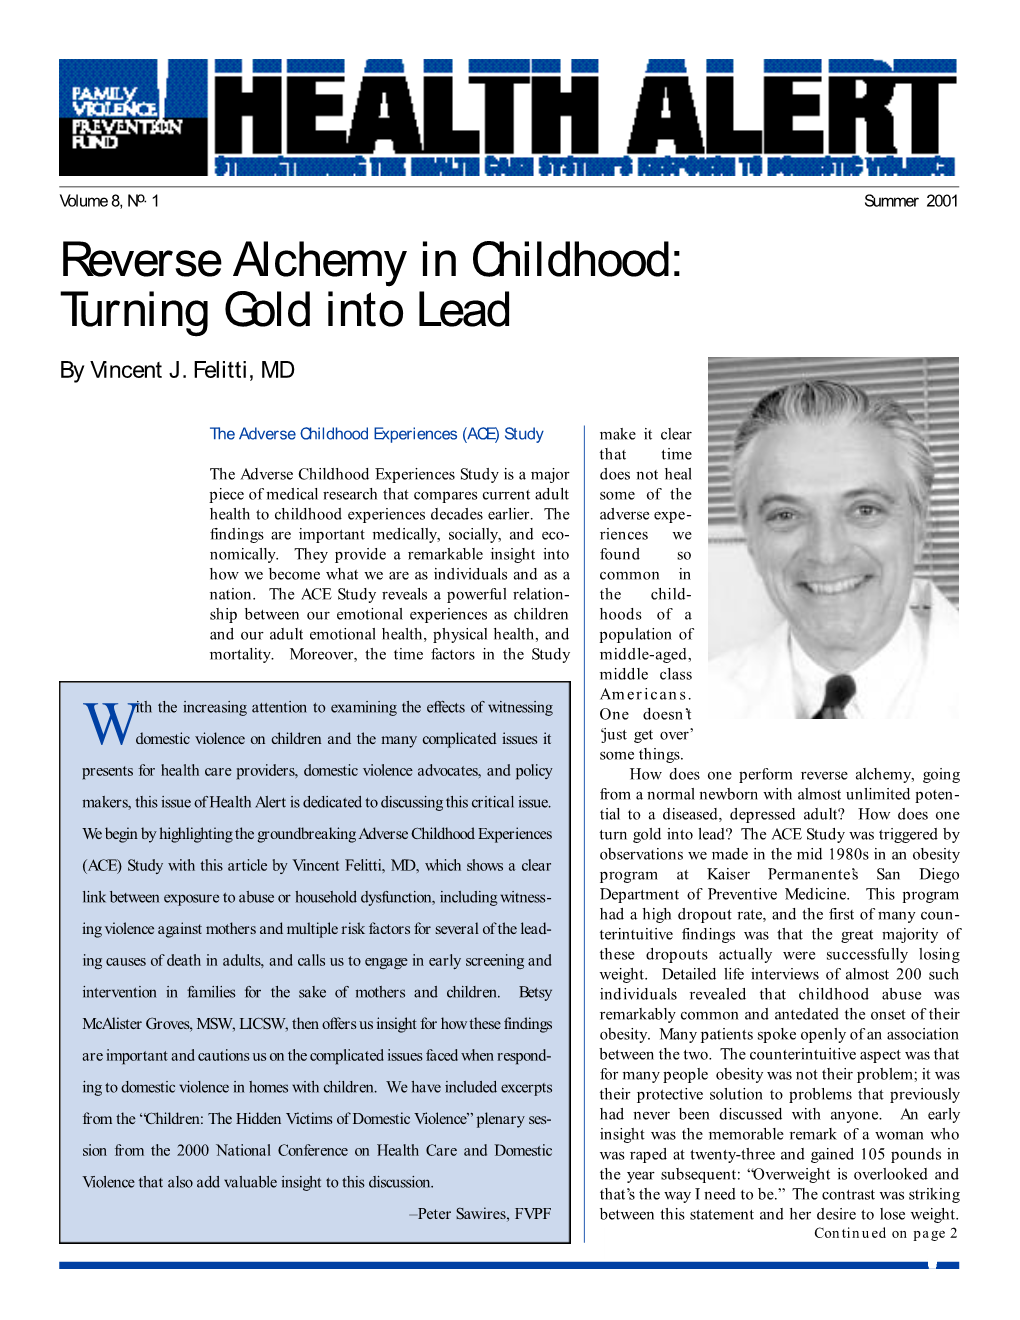 Reverse Alchemy in Childhood: Turning Gold Into Lead